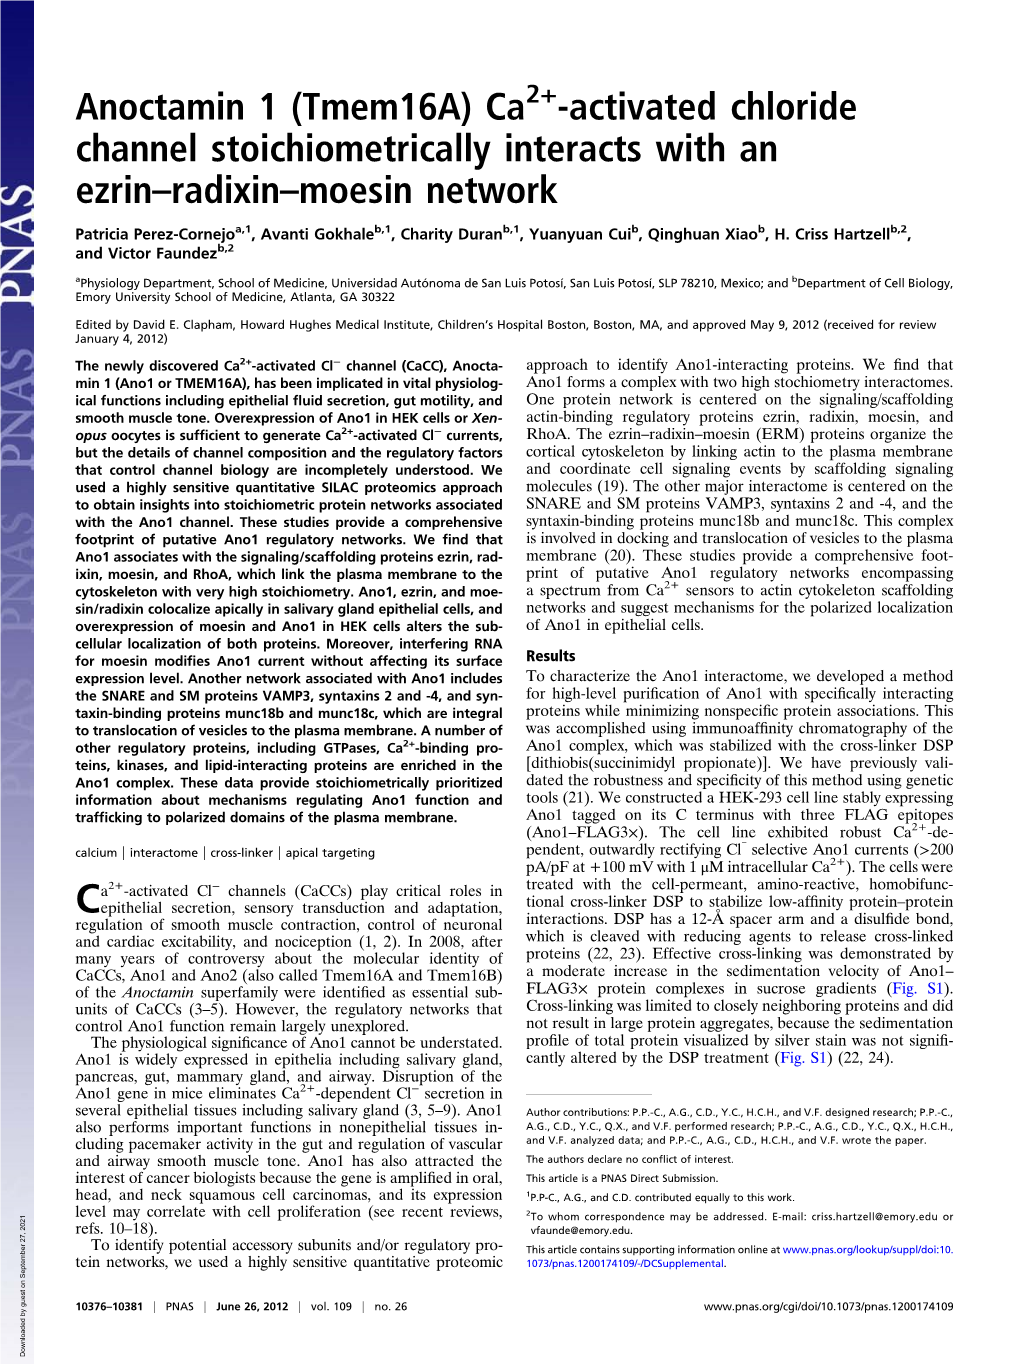 Activated Chloride Channel Stoichiometrically Interacts with an Ezrin–Radixin–Moesin Network